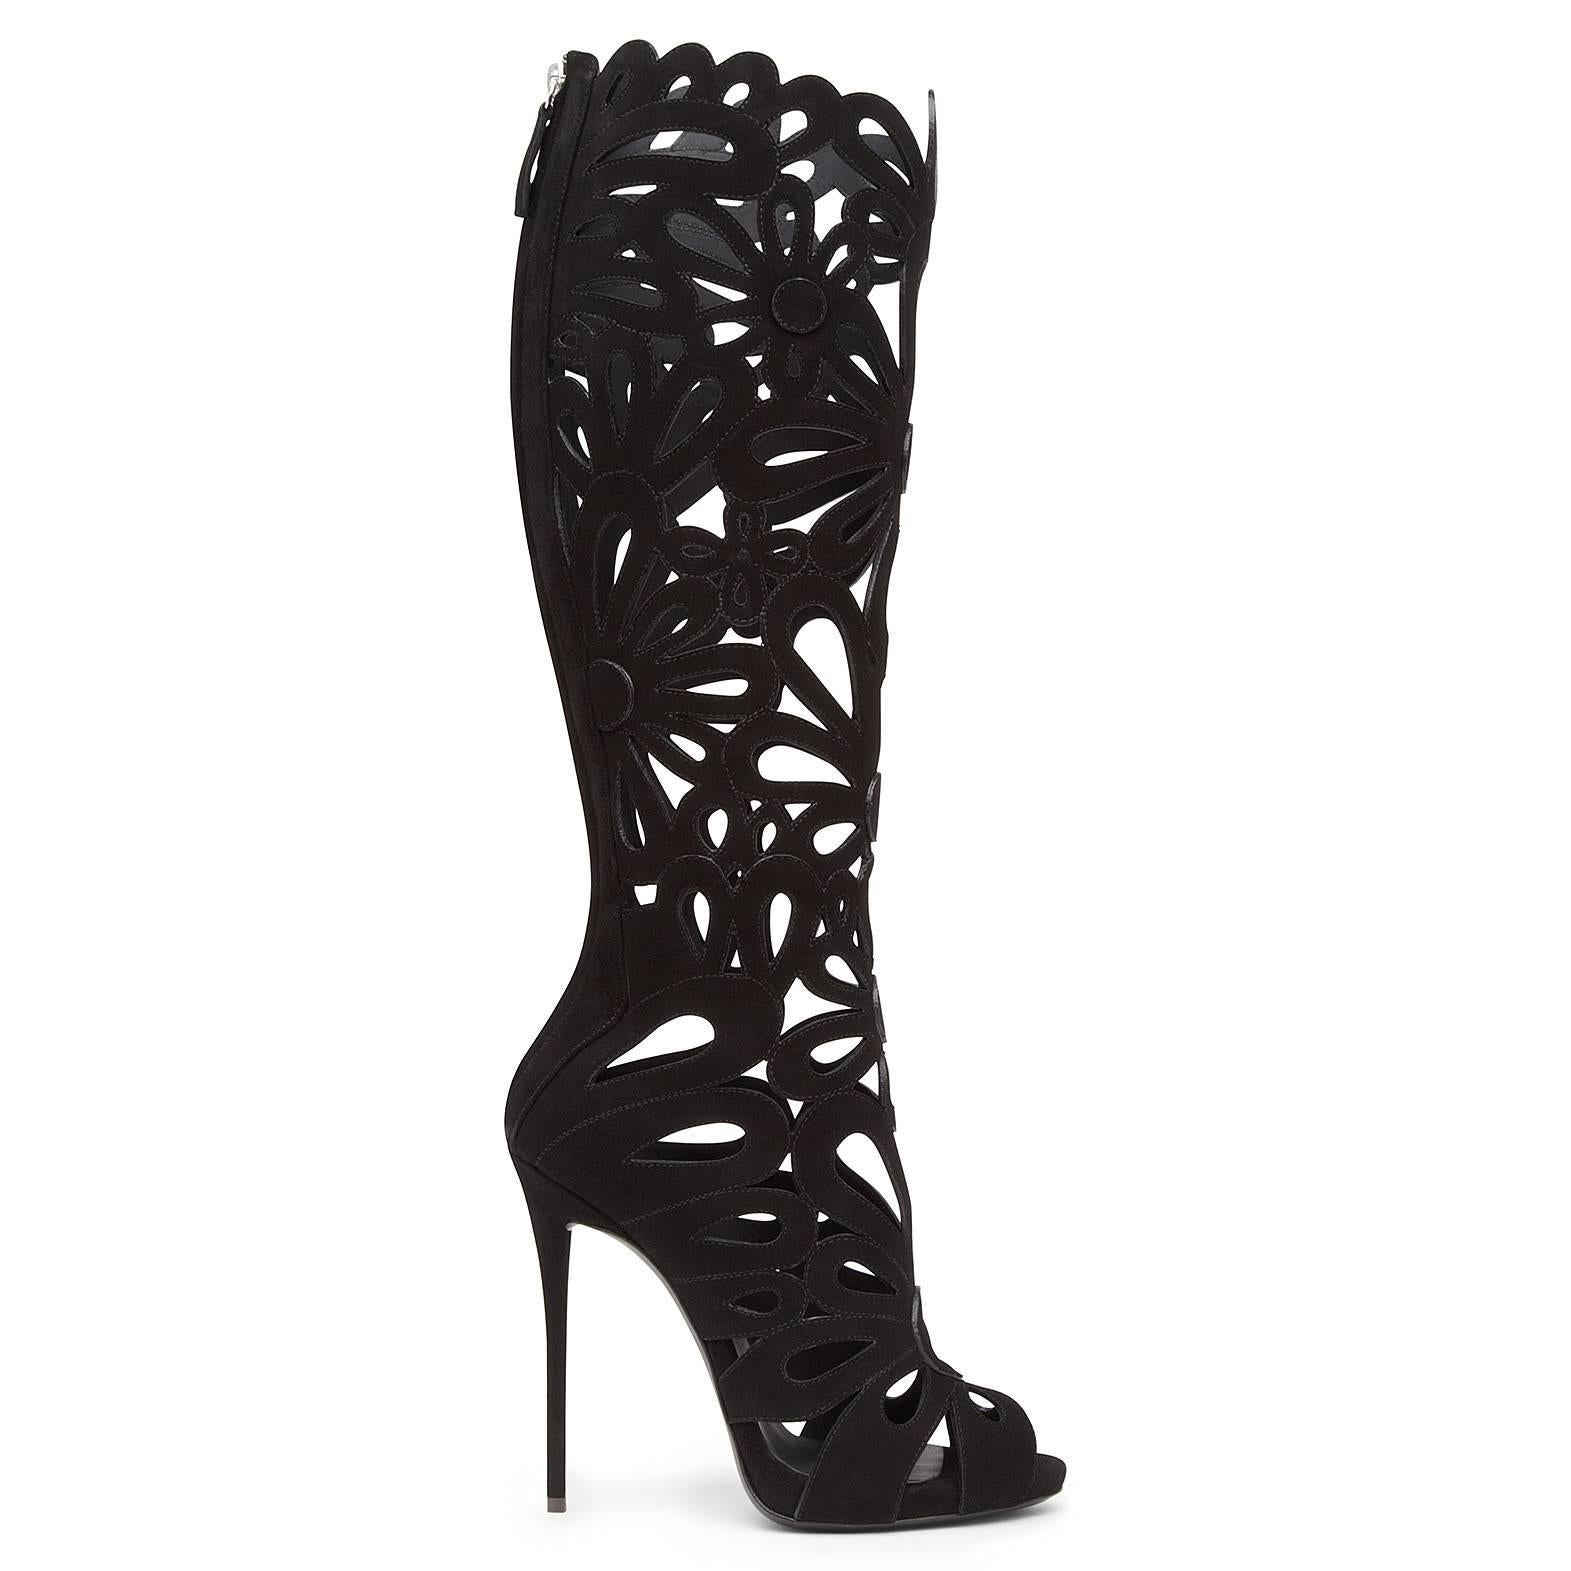 Giuseppe Zanotti New Sold Out Black Suede Lattice Cut Out Heels Boots in Box In New Condition In Chicago, IL